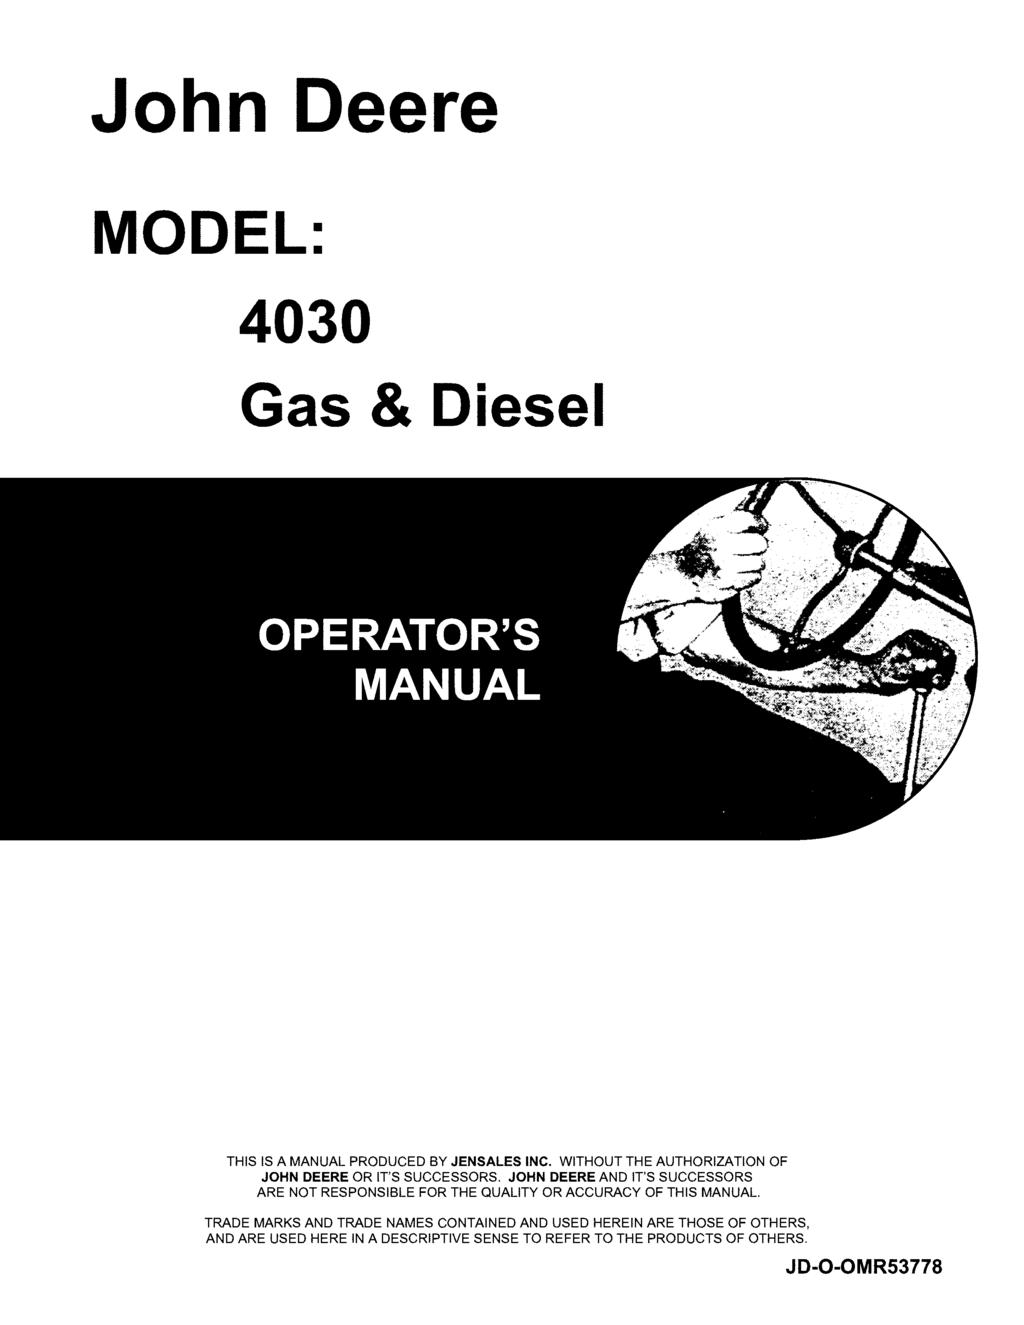 John Deere MODEL: 4030 Gas & Diesel THIS IS A MANUAL PRODUCED BY JENSALES INC. WITHOUT THE AUTHORIZATION OF JOHN DEERE OR IT'S SUCCESSORS.